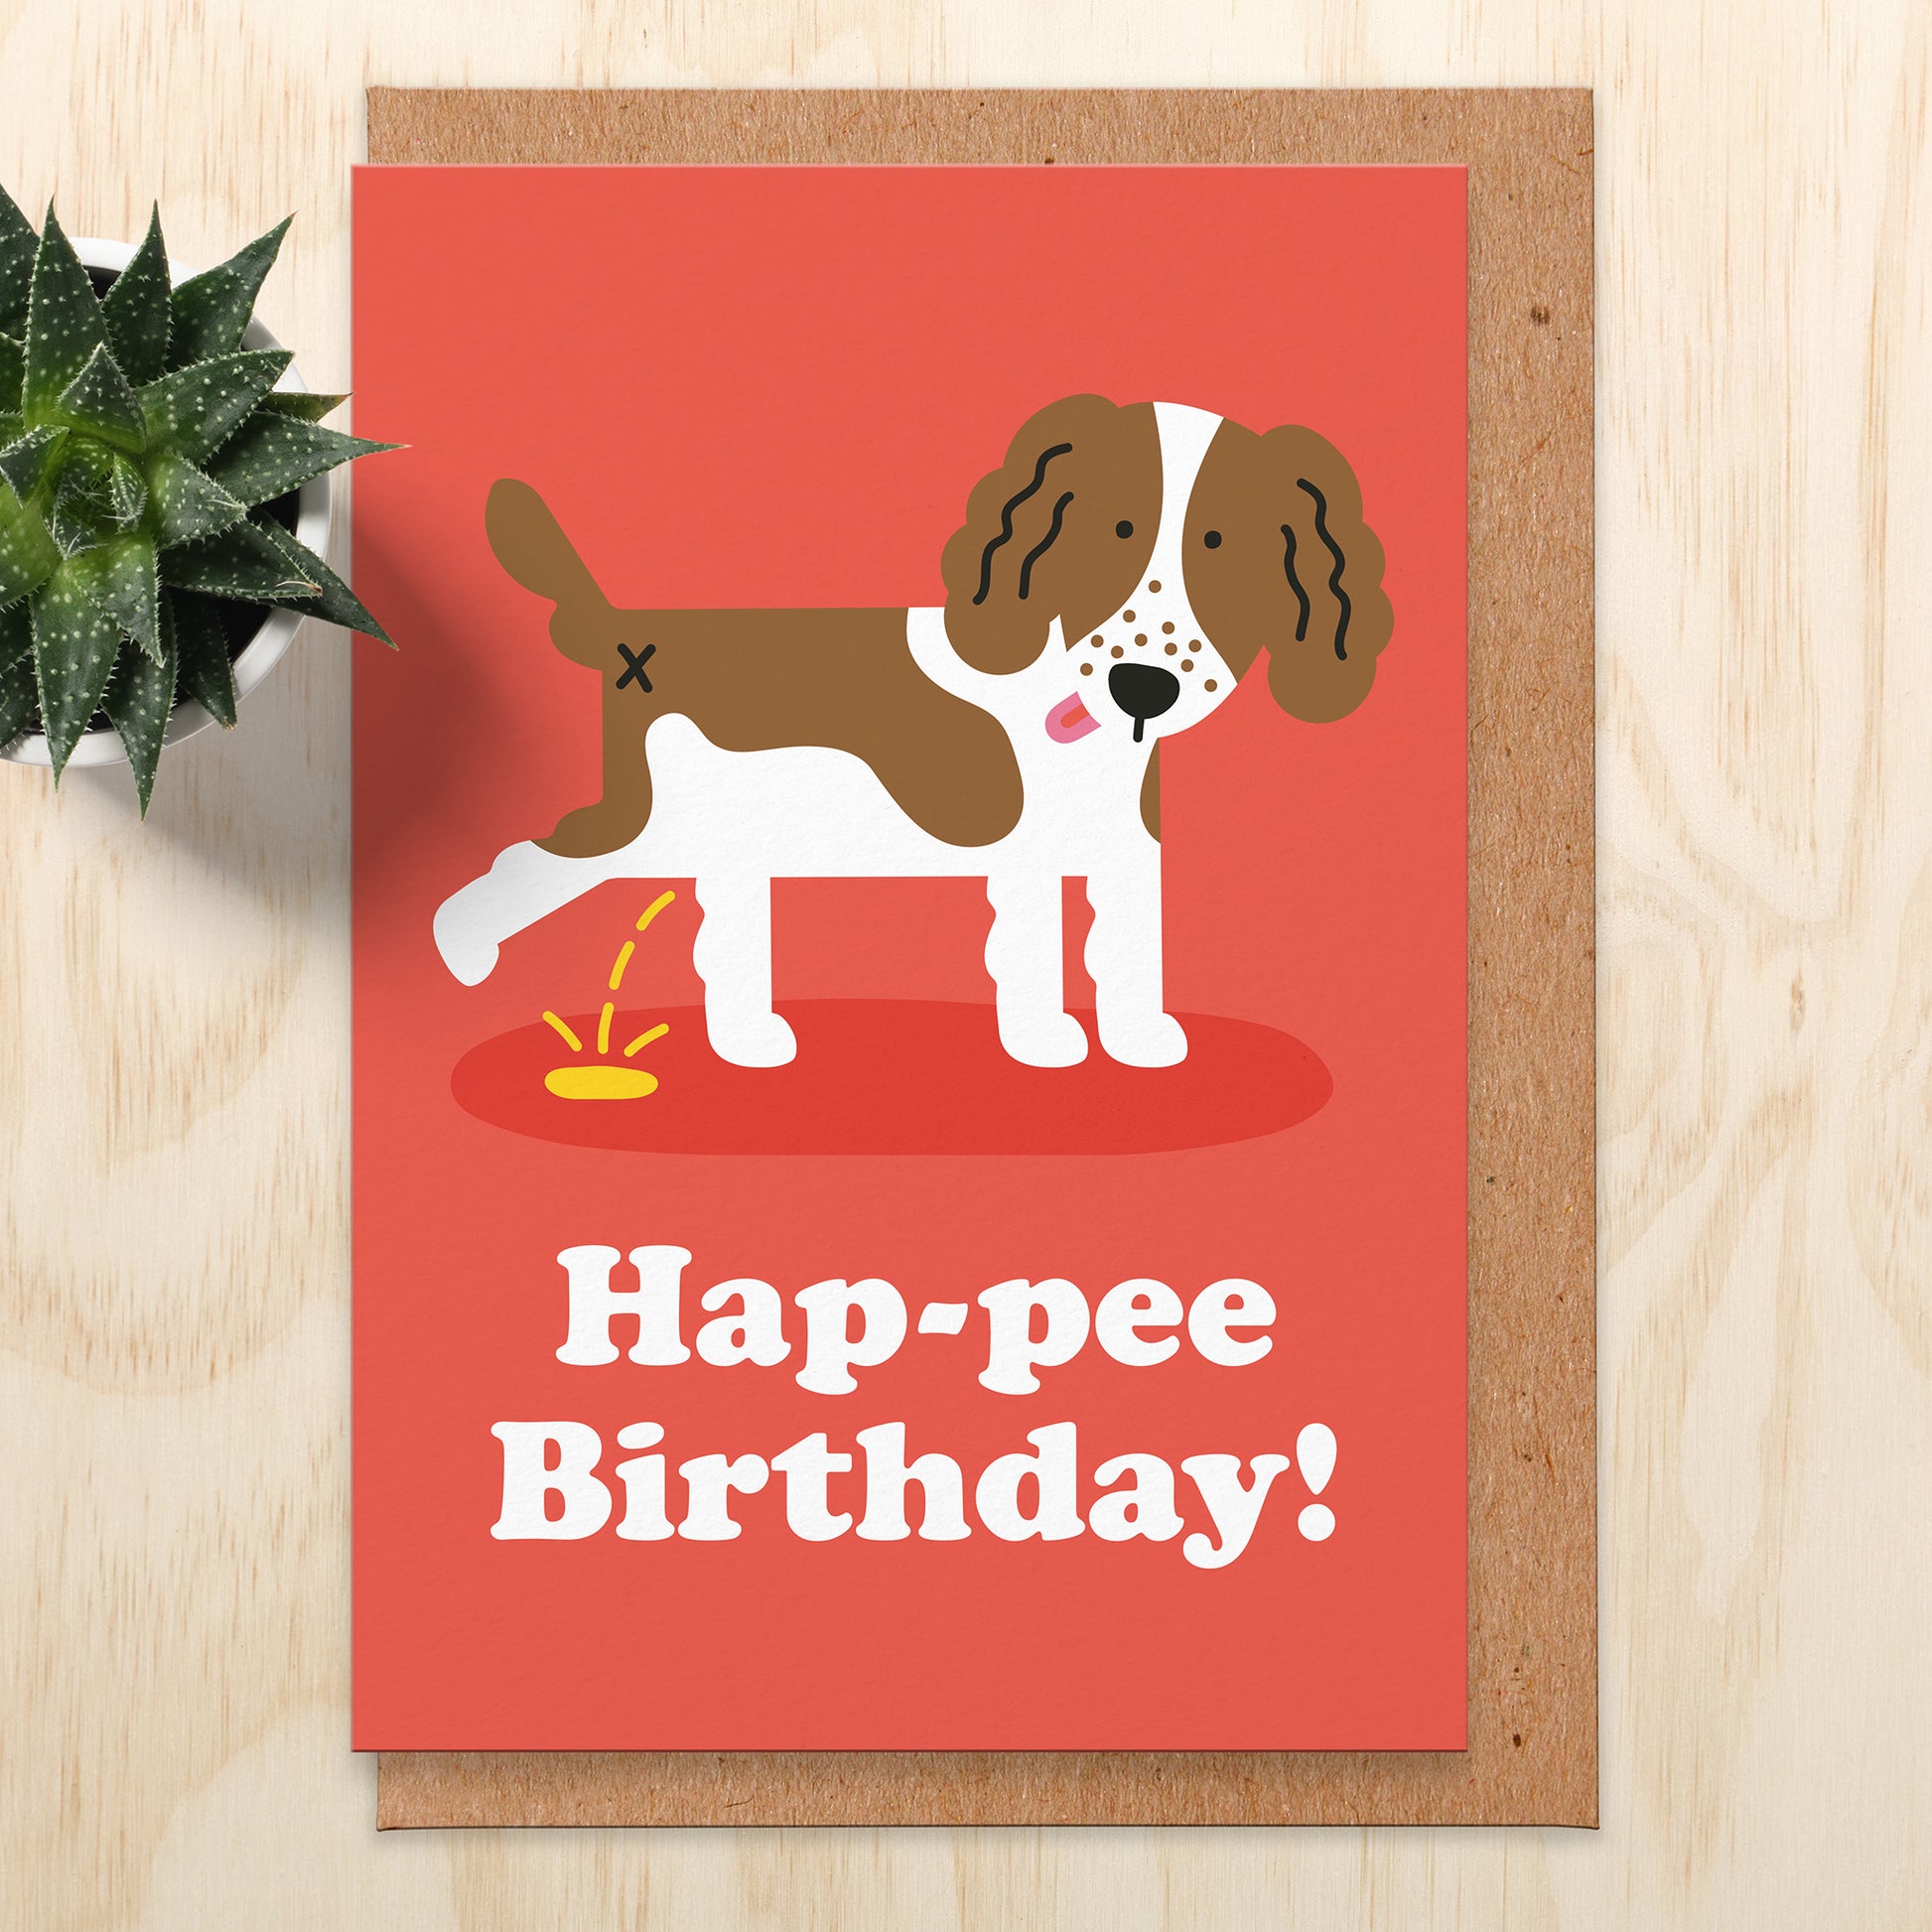 Birthday card with an illustration of a brown and white spaniel peeing. The background is red and the words read hap-pee birthday!